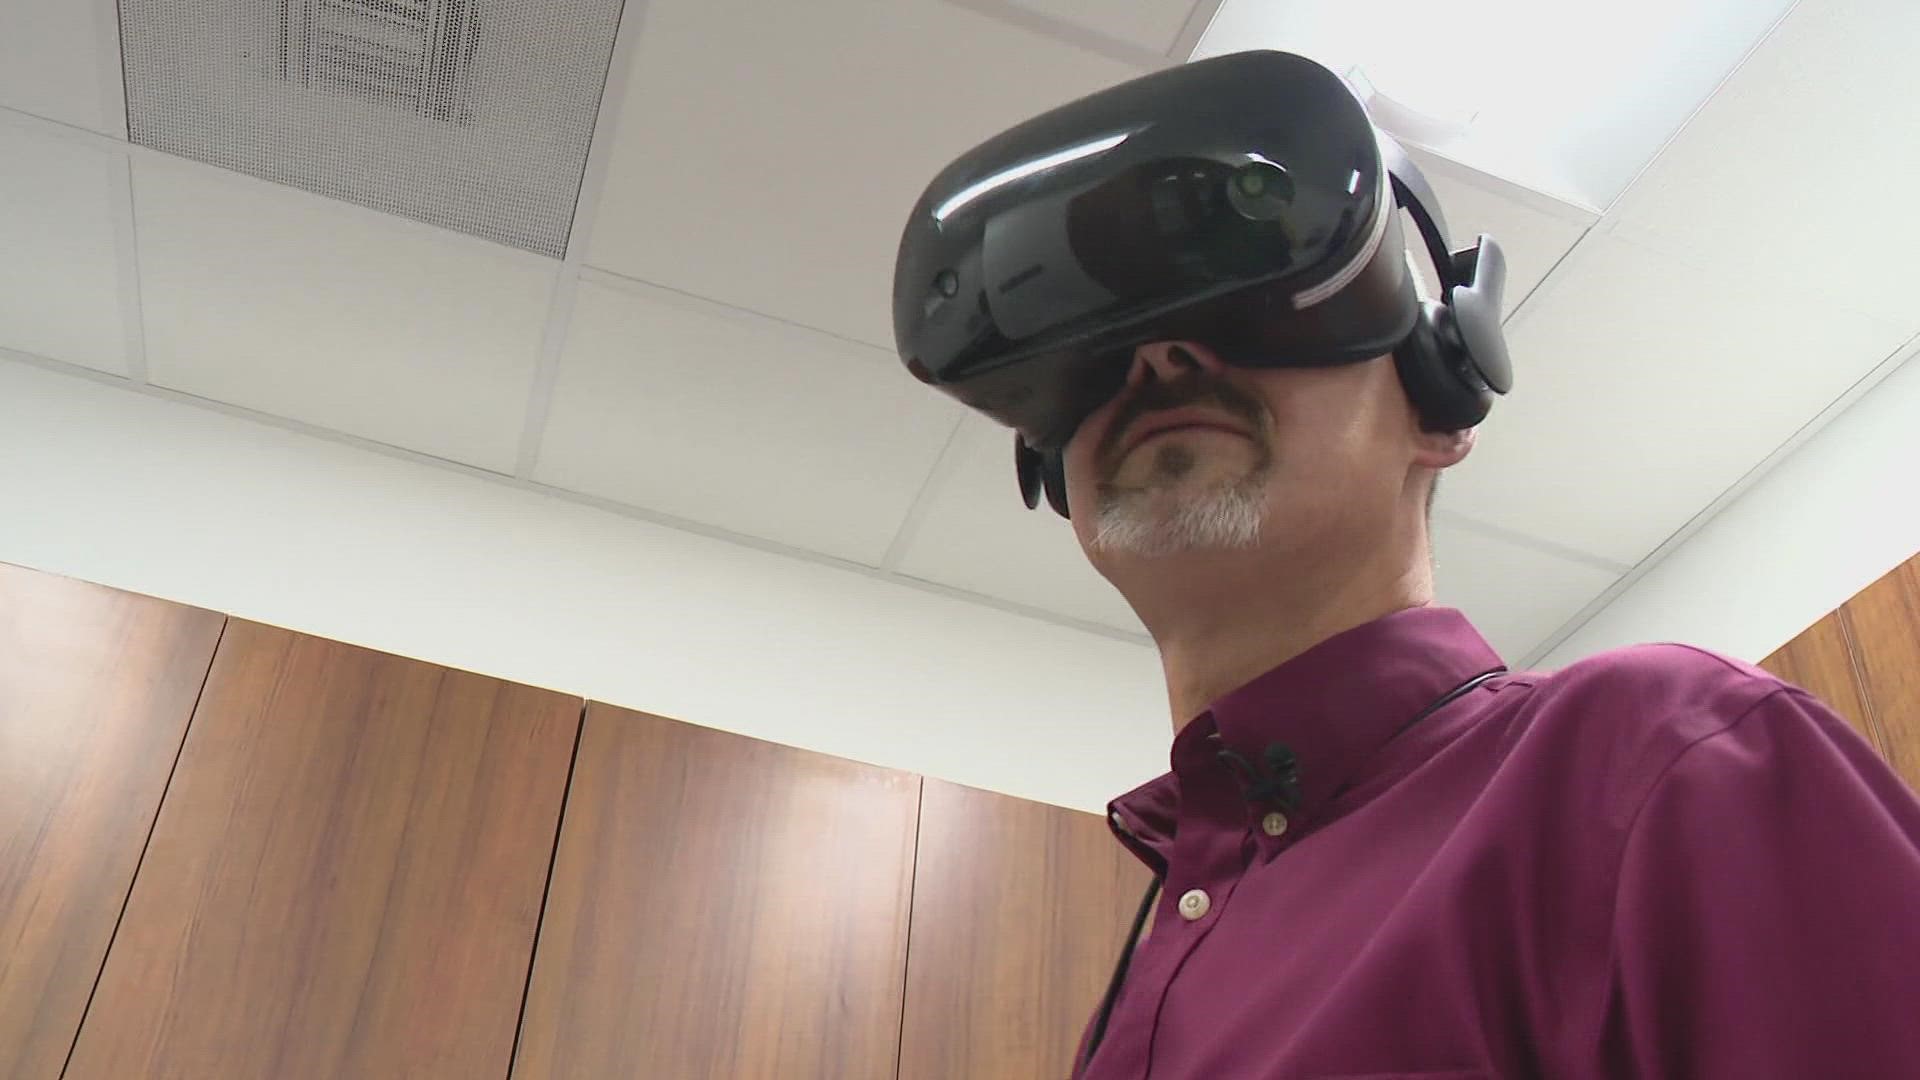 A recent study at the IU School of Medicine shows virtual reality sessions can help Hoosiers who are battling substance abuse.